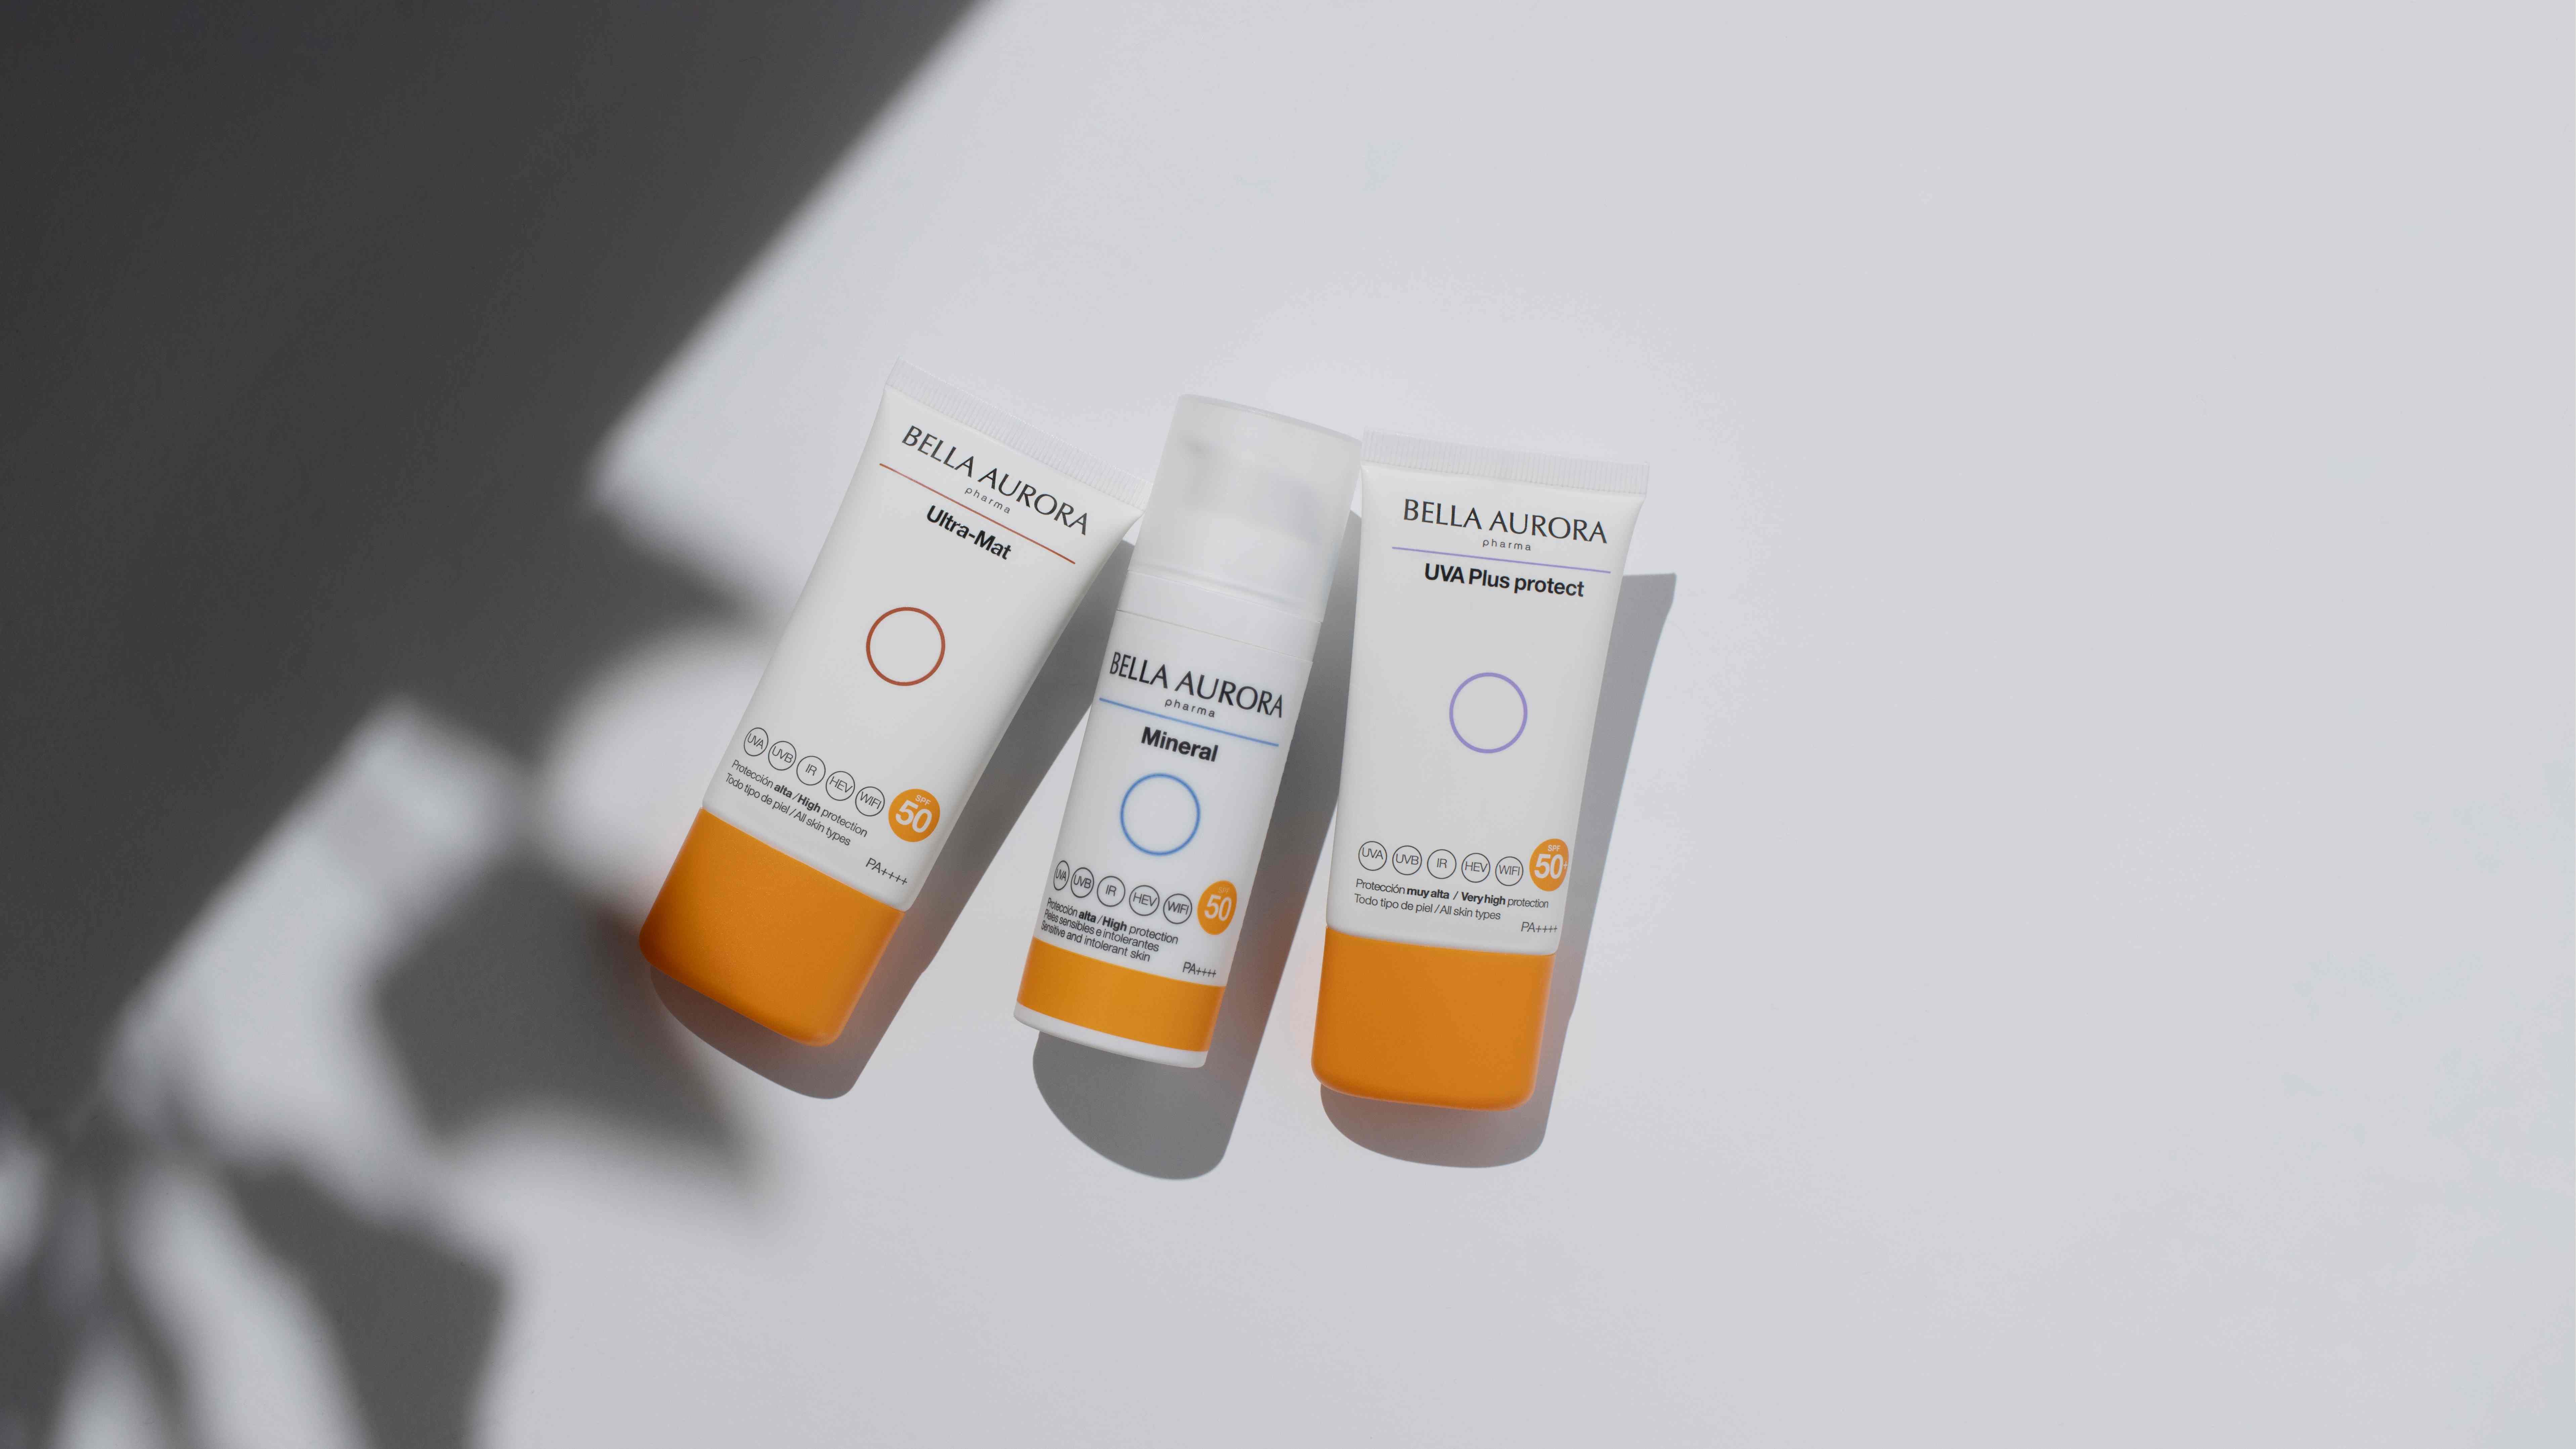 Bella Aurora launches its new line of sun protection